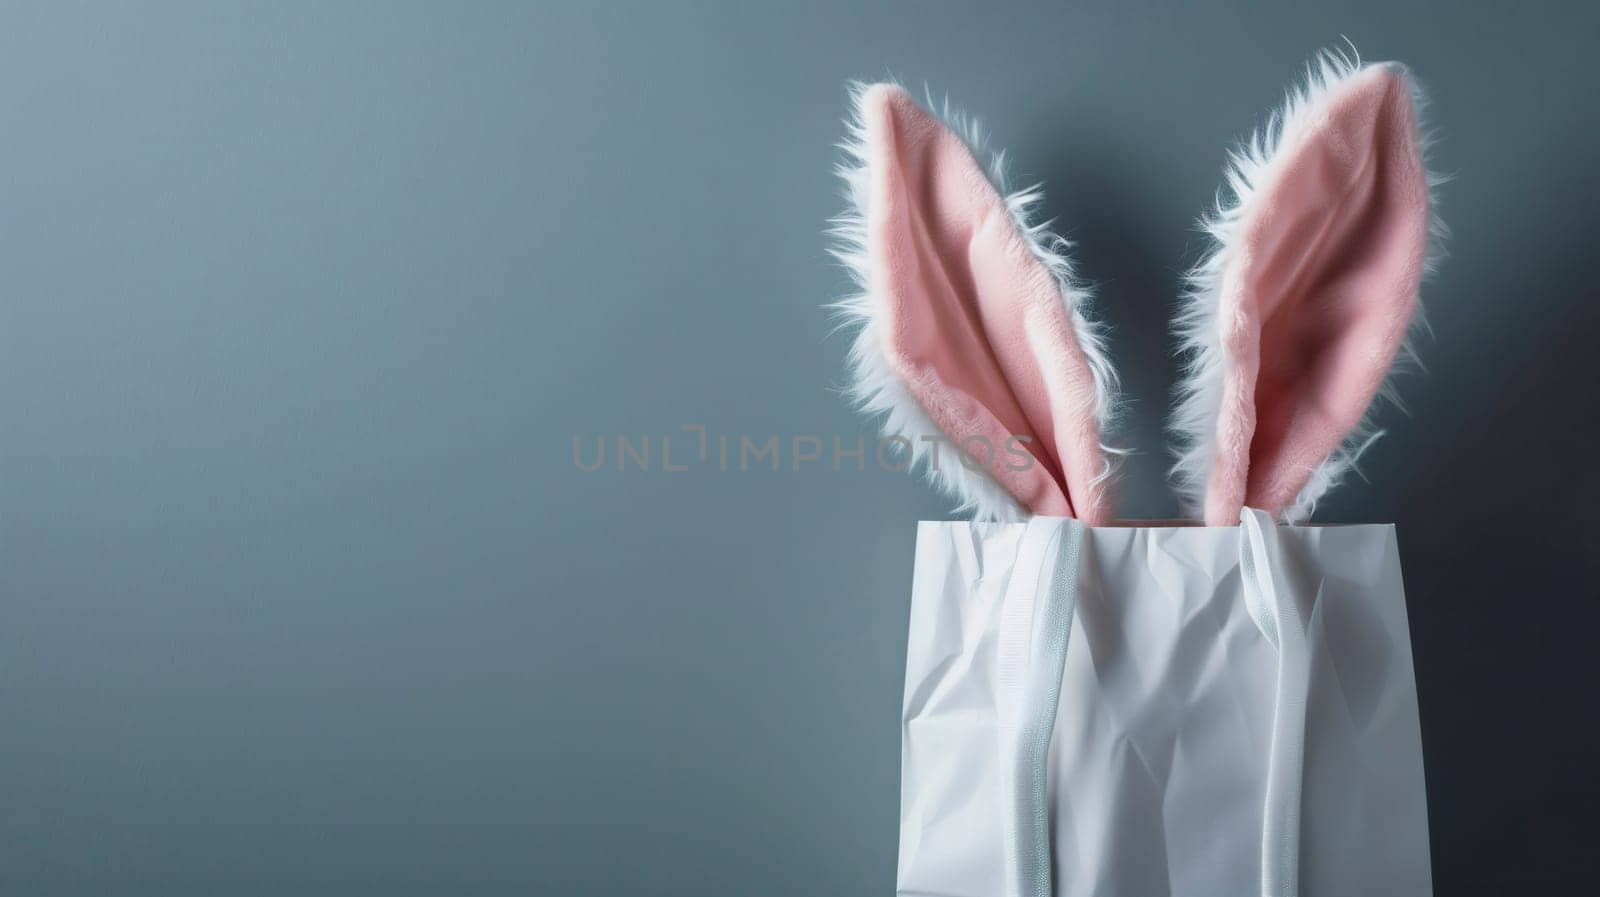 One beautiful velvet ears peeking out of a crumpled paper bag standing on the right on a gray background with copy space on the left, side view close-up.